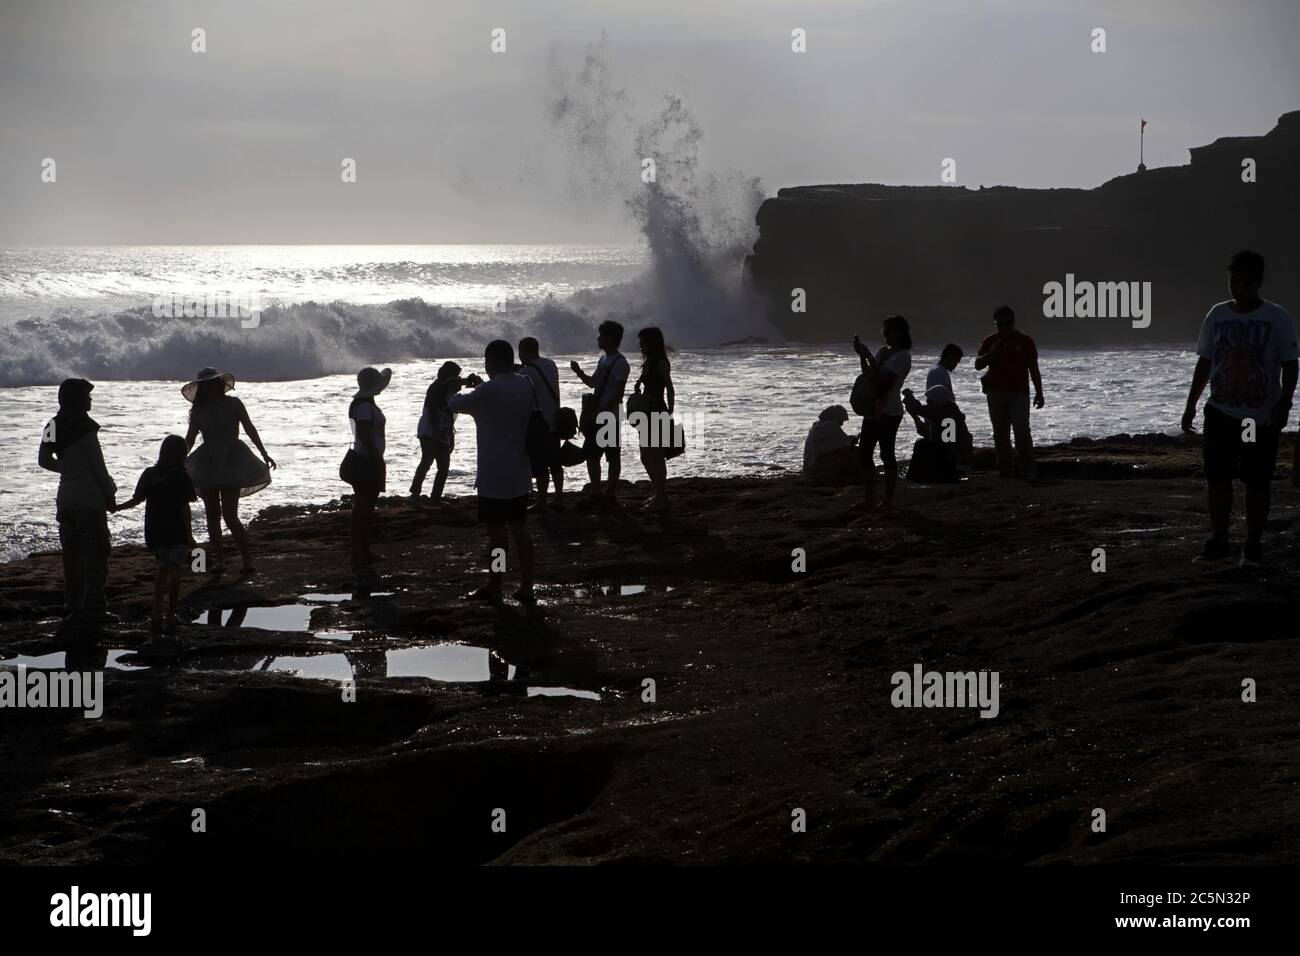 Tourists silhouetted as they have leisure time on a rocky beach with large wave smashing on cliff in the background, in Tanah Lot, Bali, Indonesia. Stock Photo